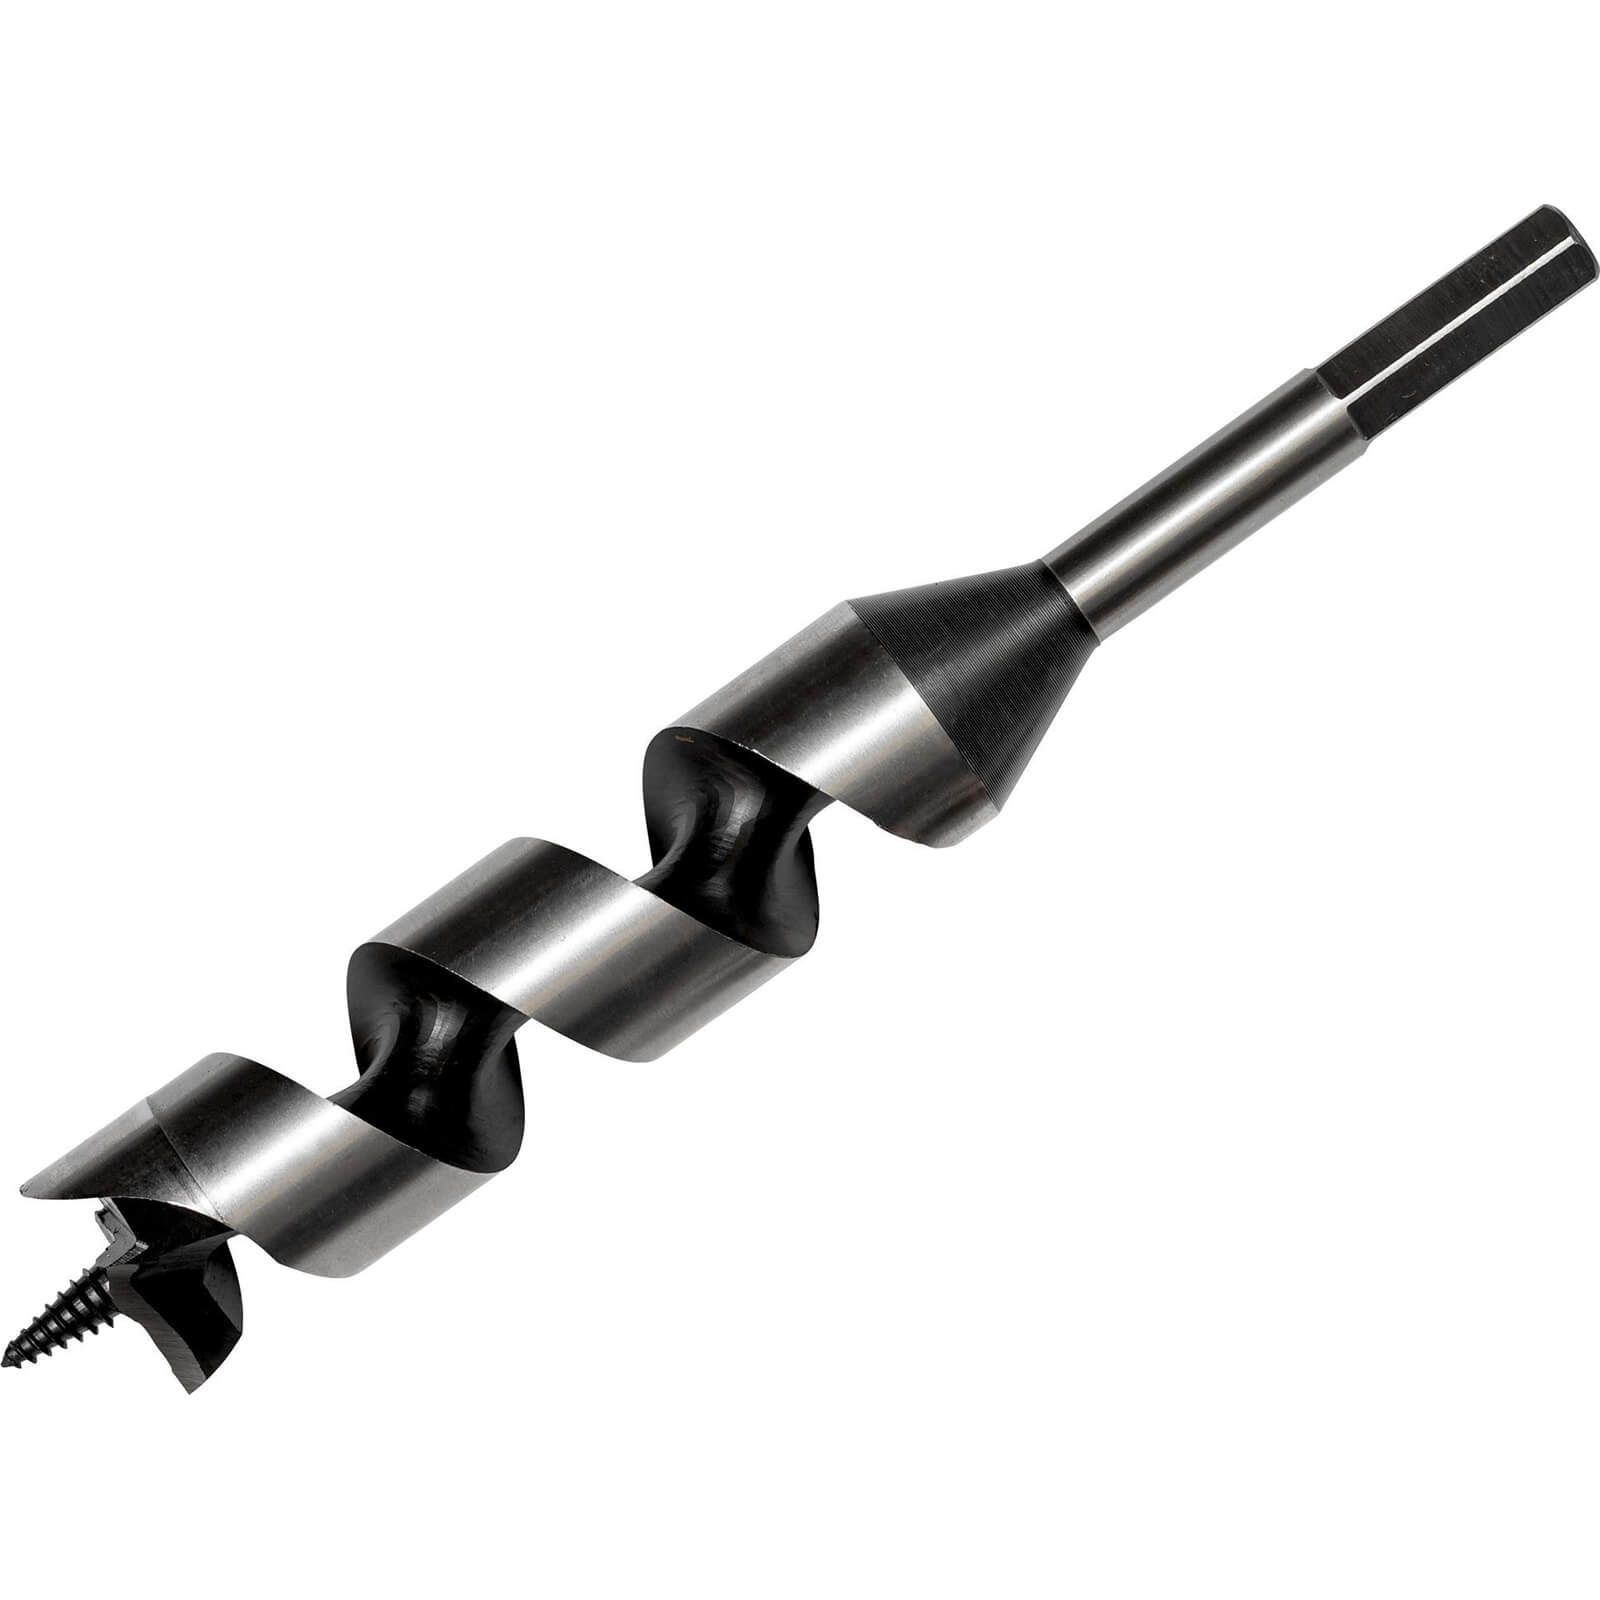 Image of Bahco 9626 Series Combination Auger Drill Bit 12mm 230mm